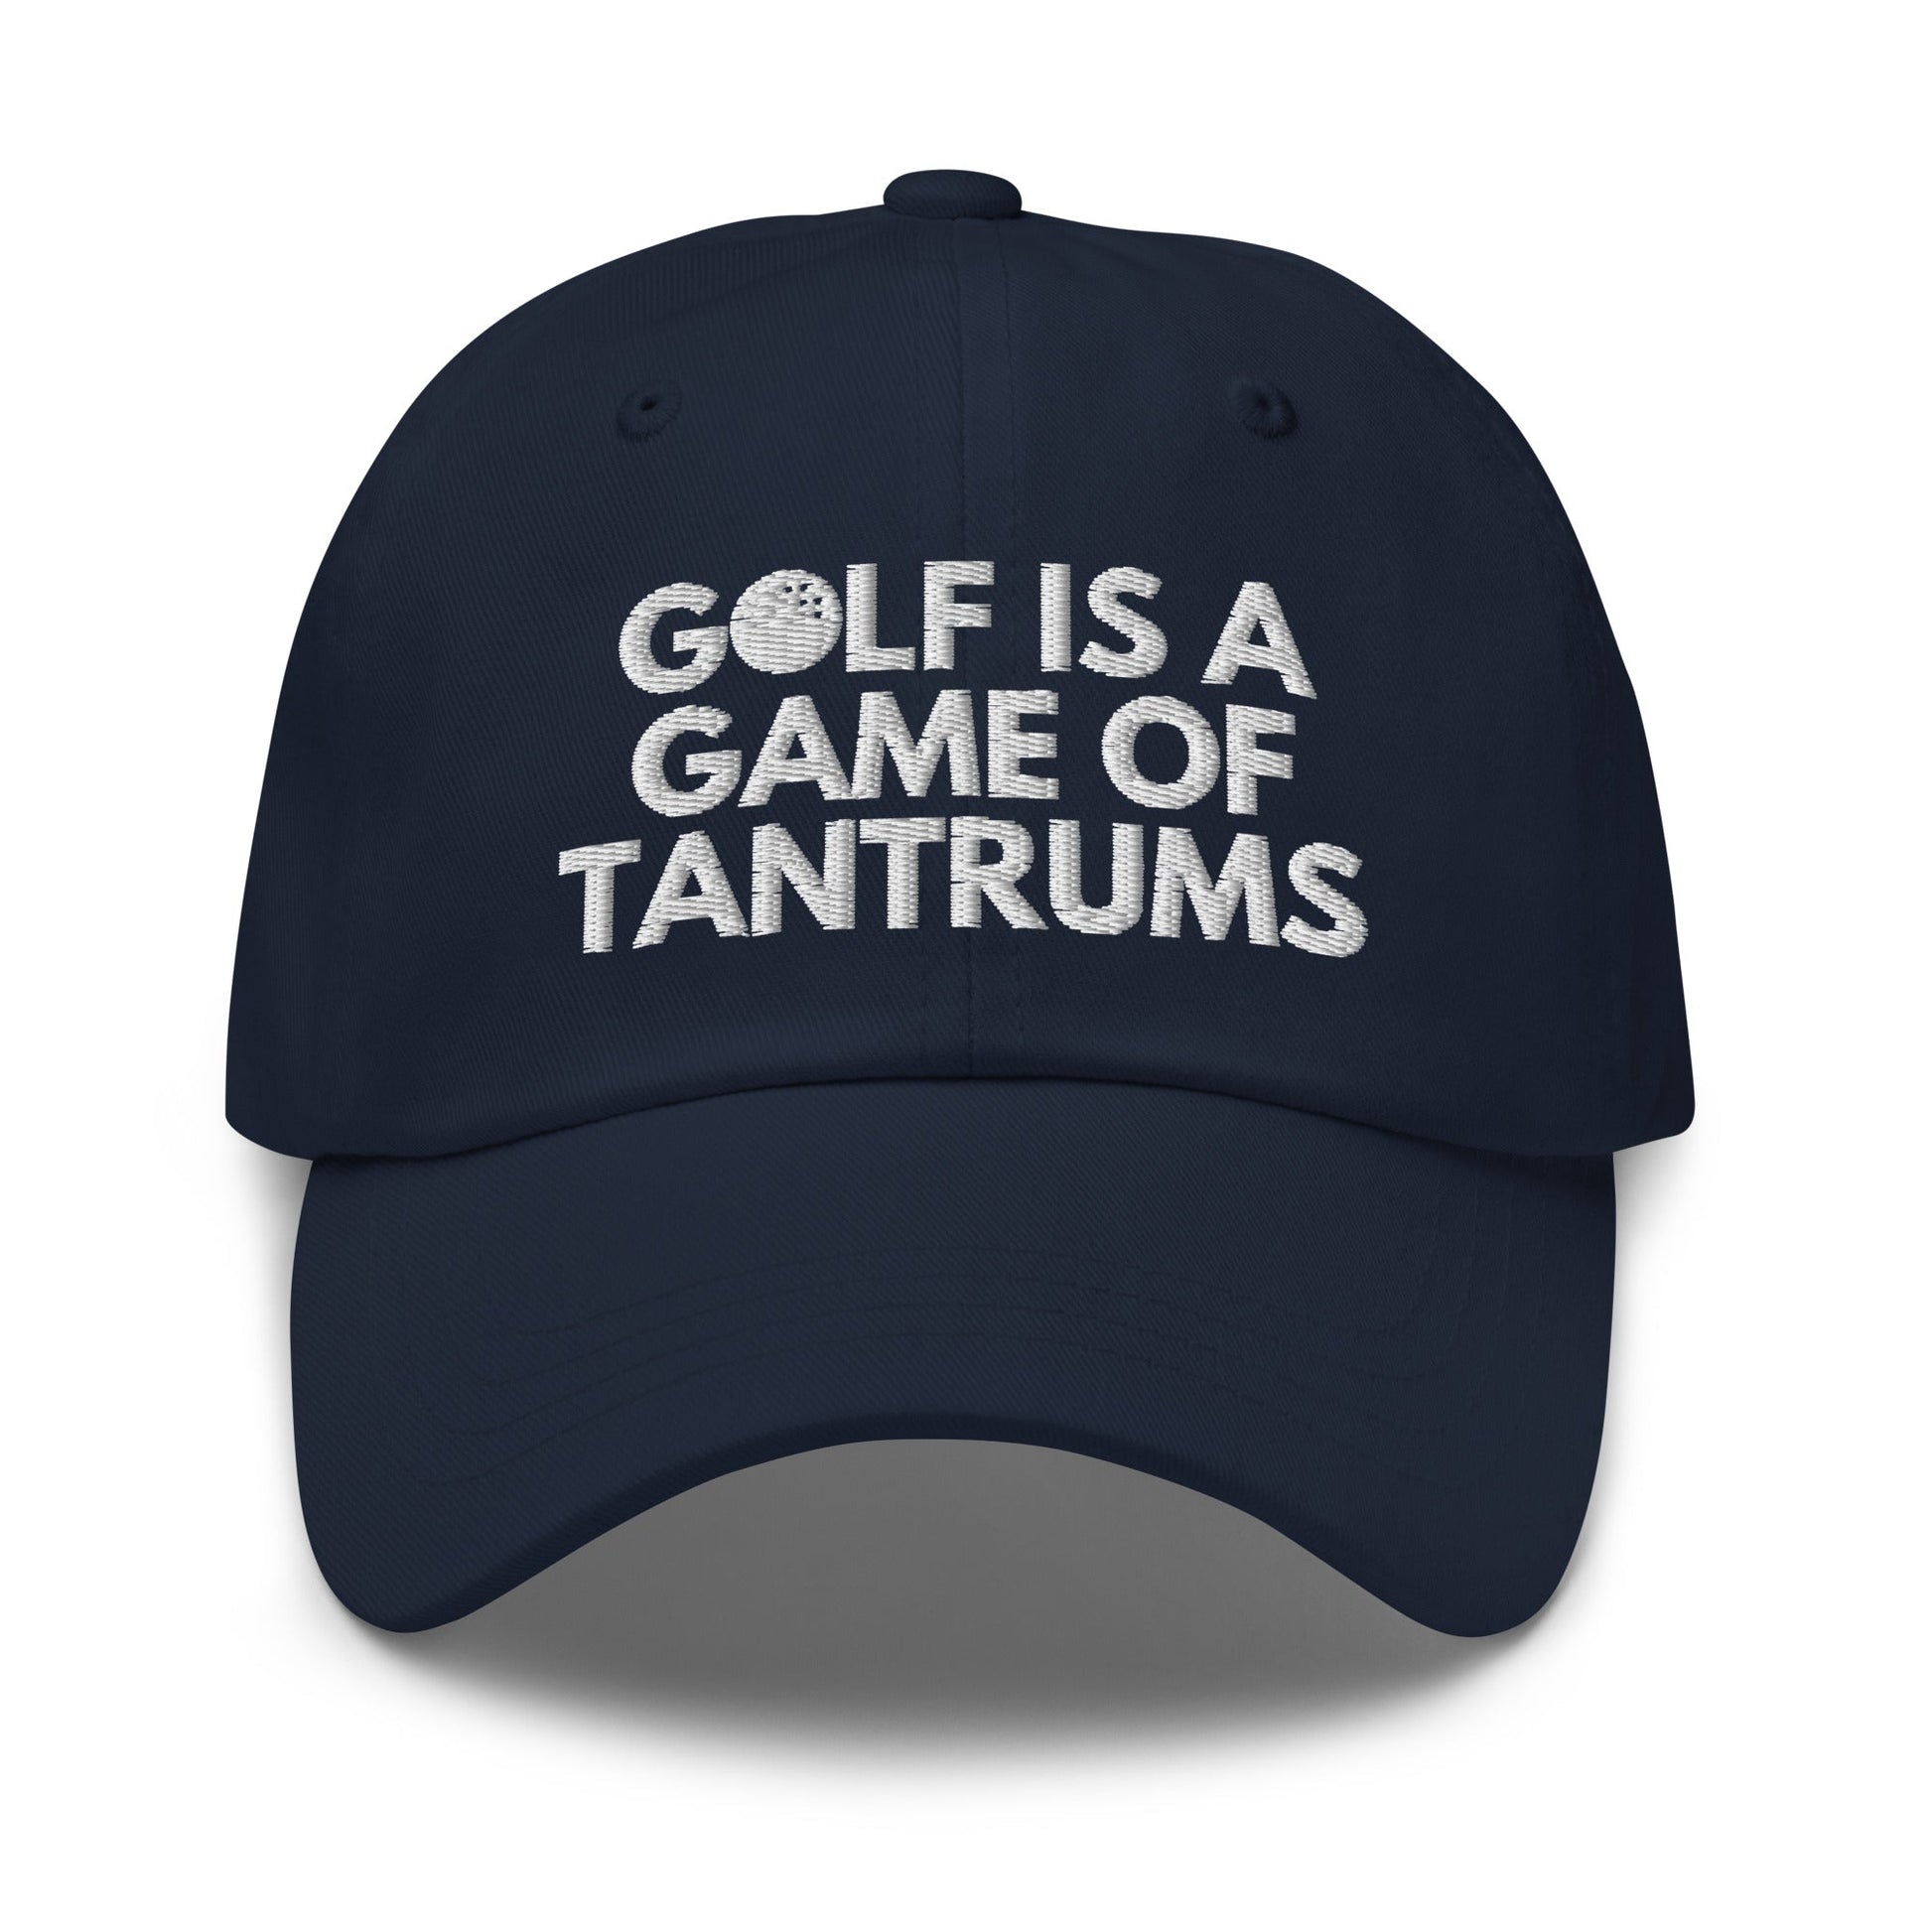 Funny Golfer Gifts  Dad Cap Golf Is A Game Of Tantrums Hat Cap